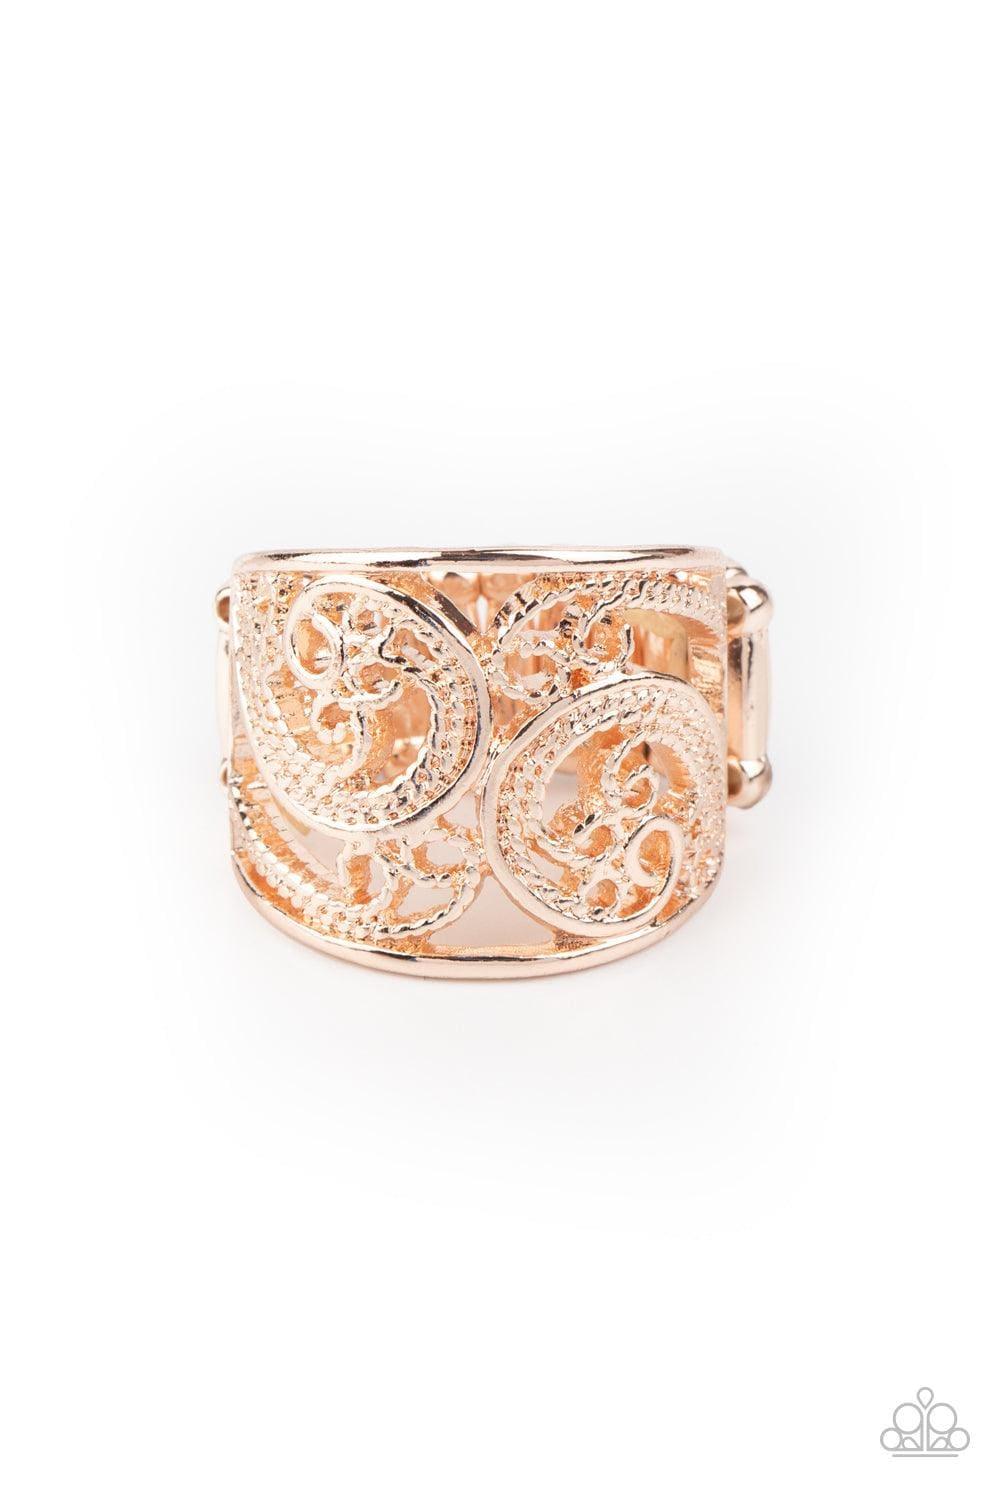 Paparazzi Accessories - Turning The Tides - Rose Gold Ring - Bling by JessieK